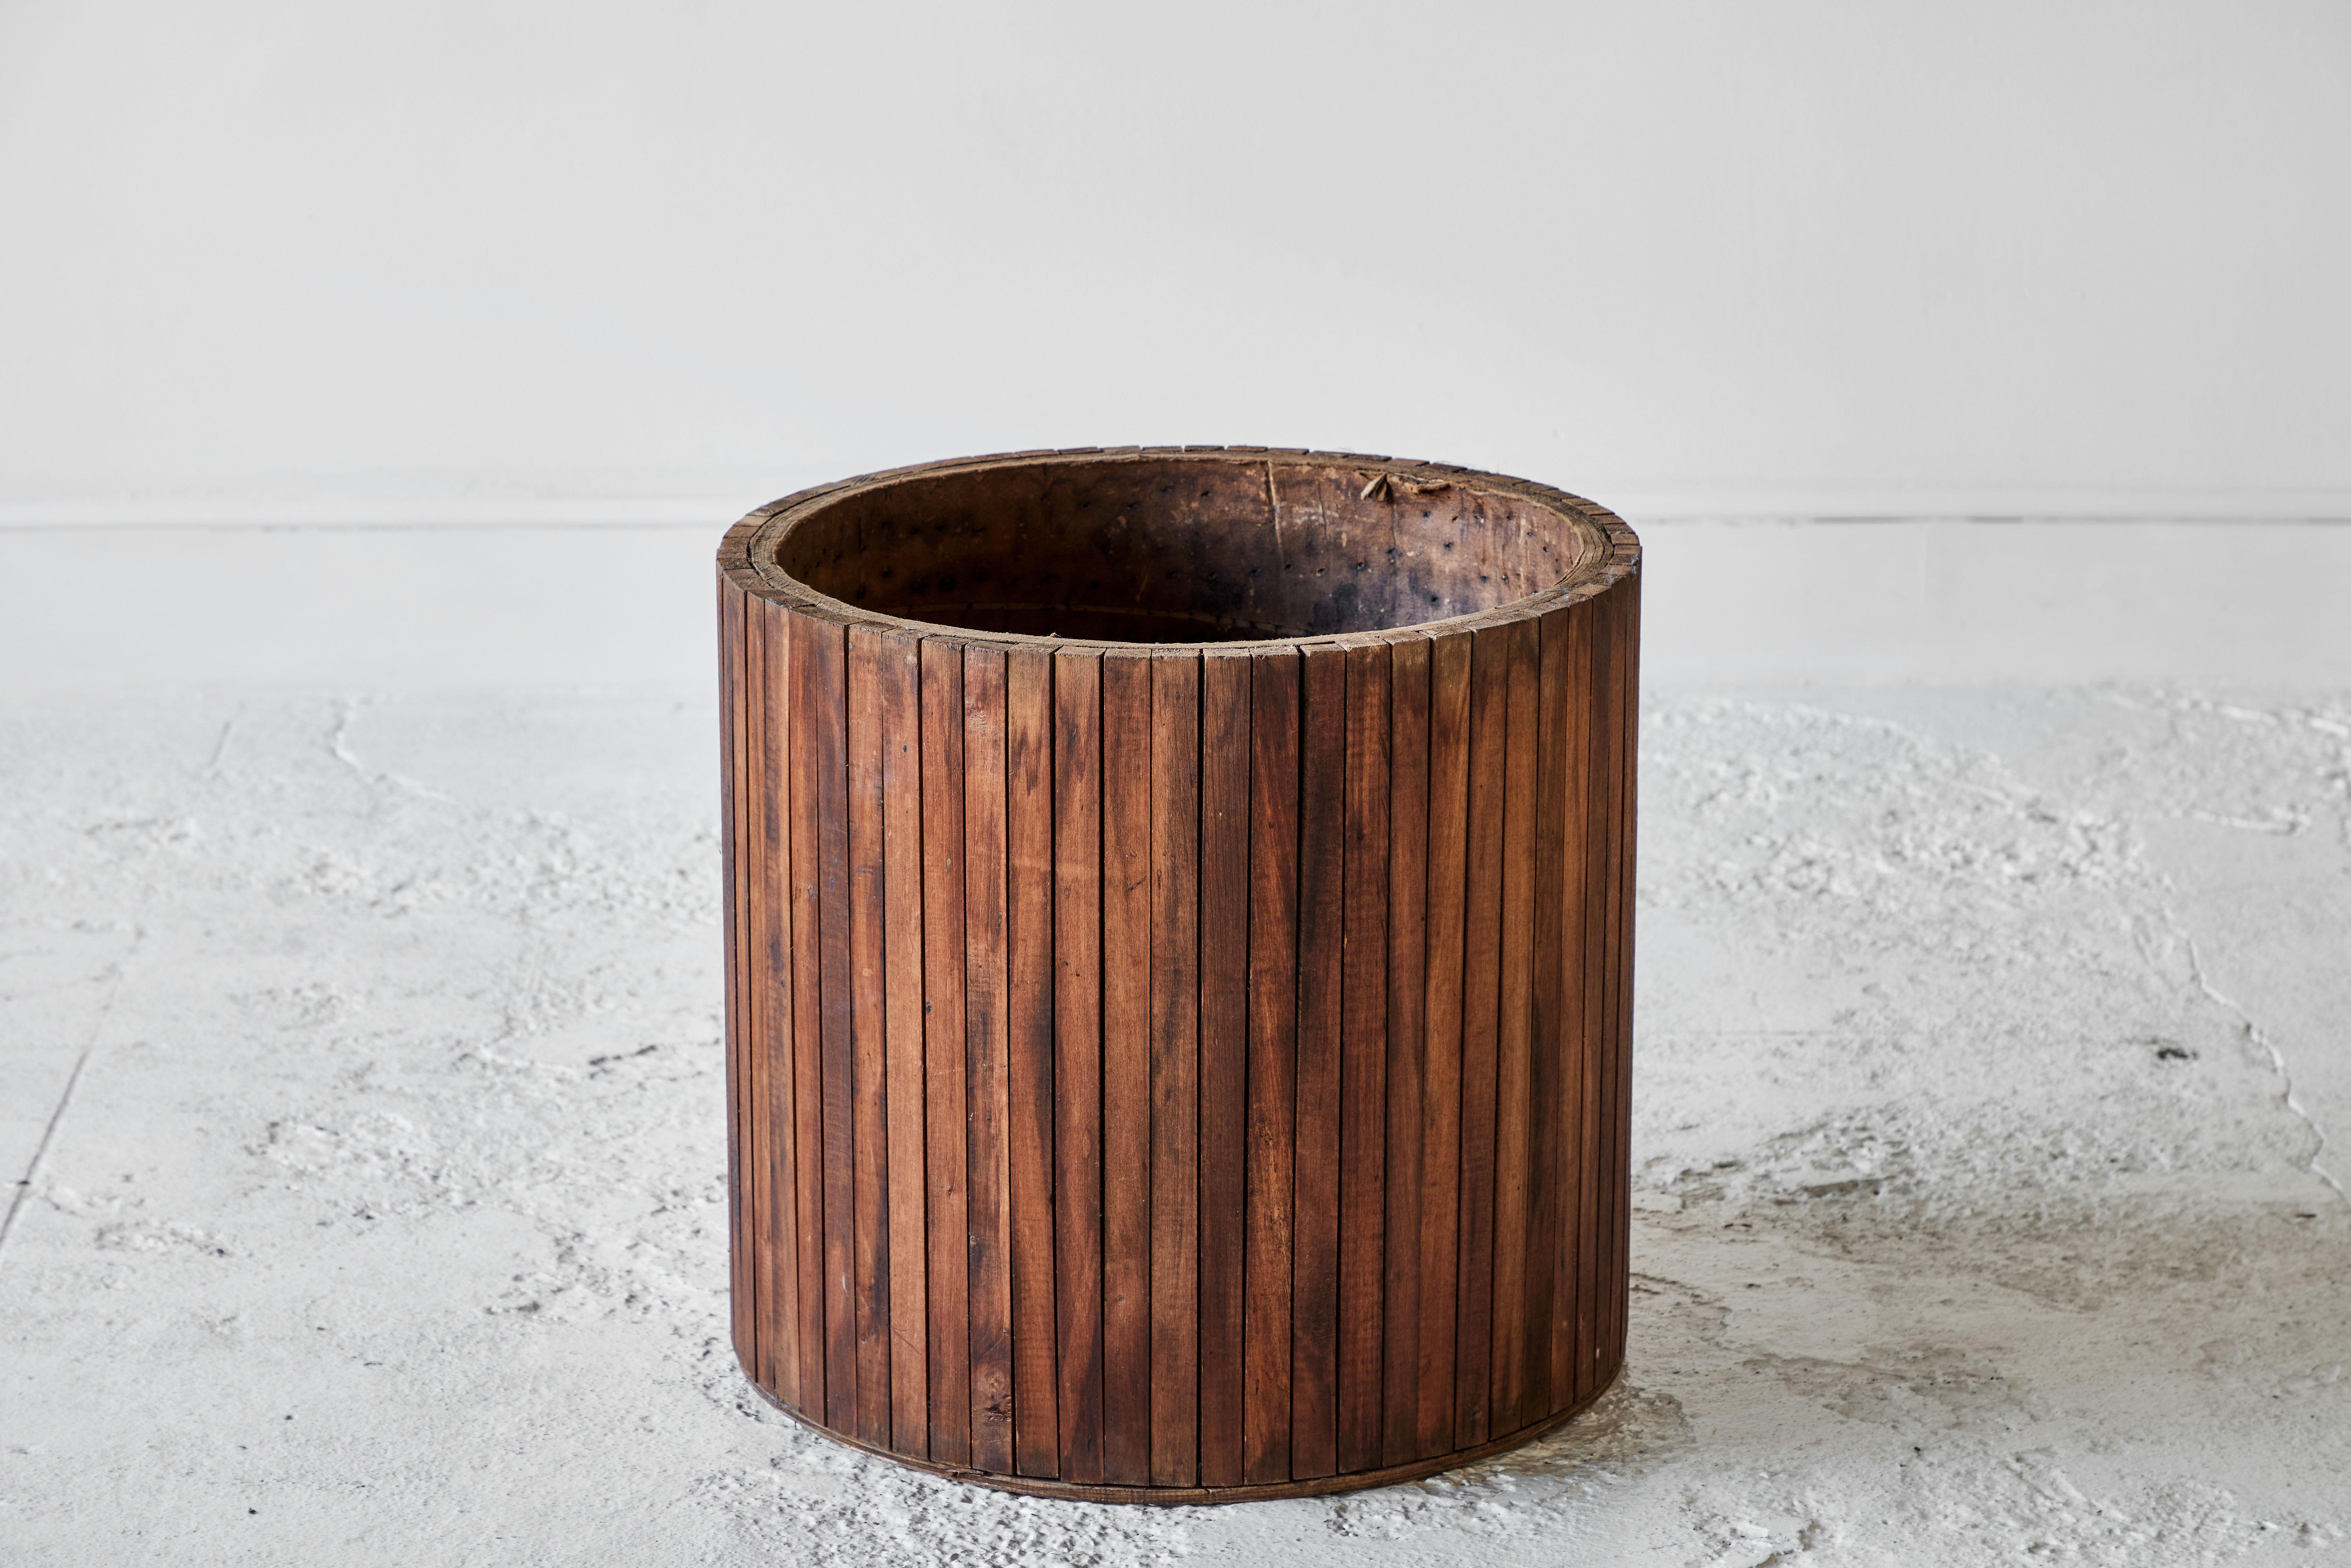 Rustic round wooden faceted planter.